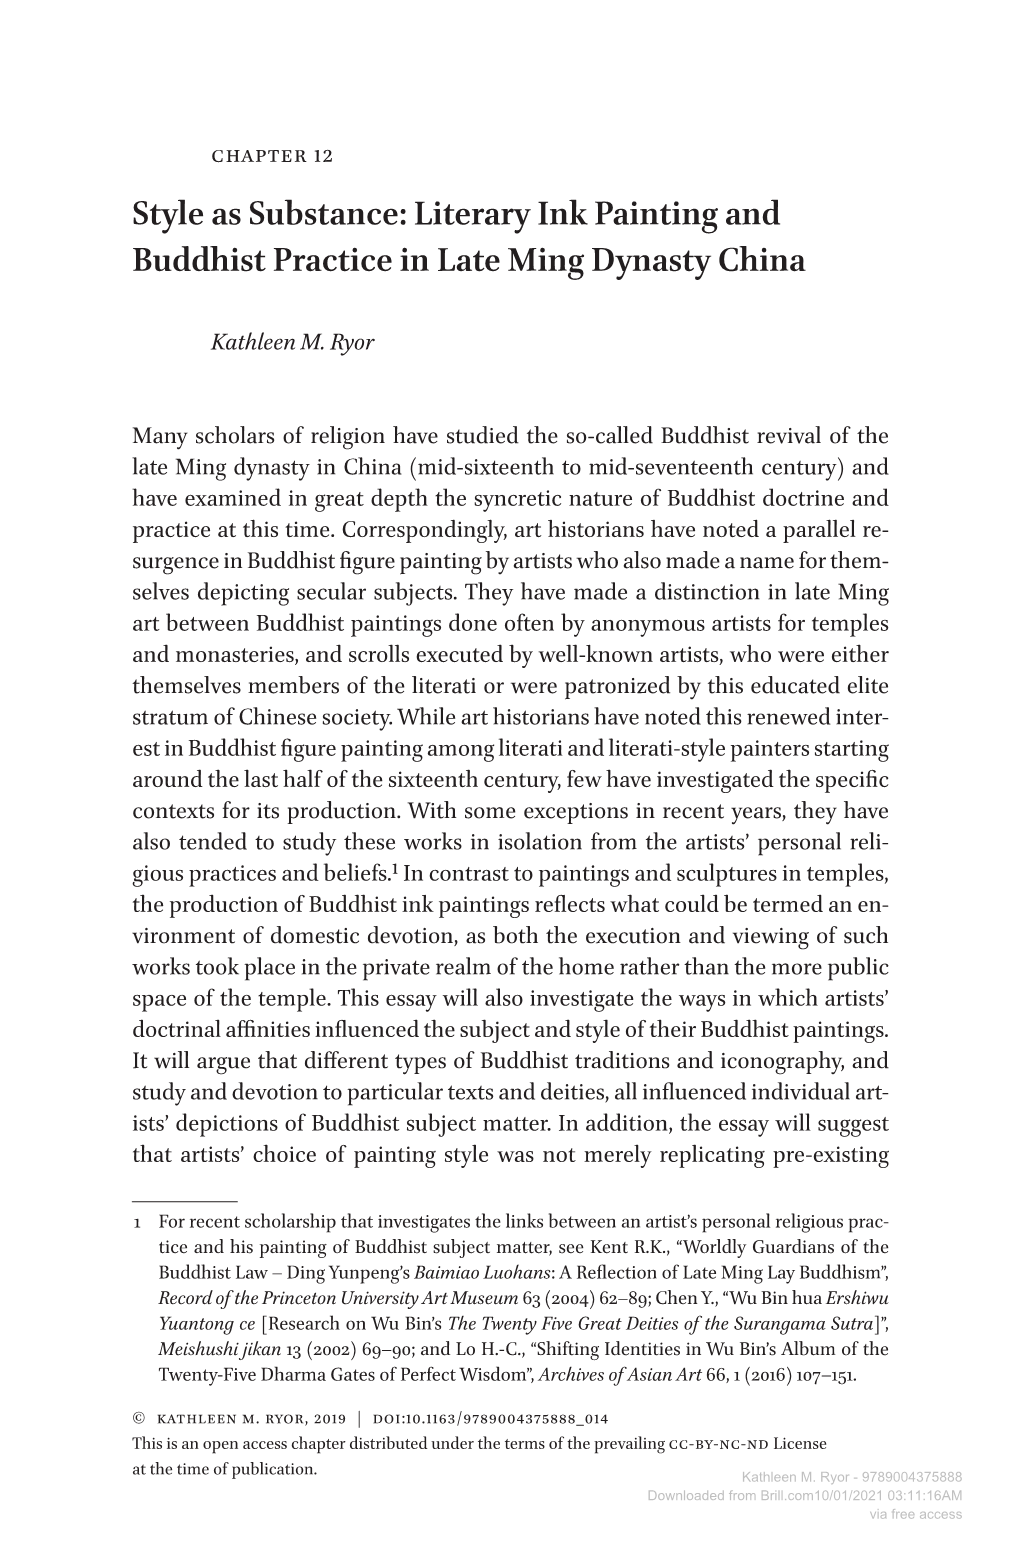 Style As Substance: Literary Ink Painting and Buddhist Practice in Late Ming Dynasty China